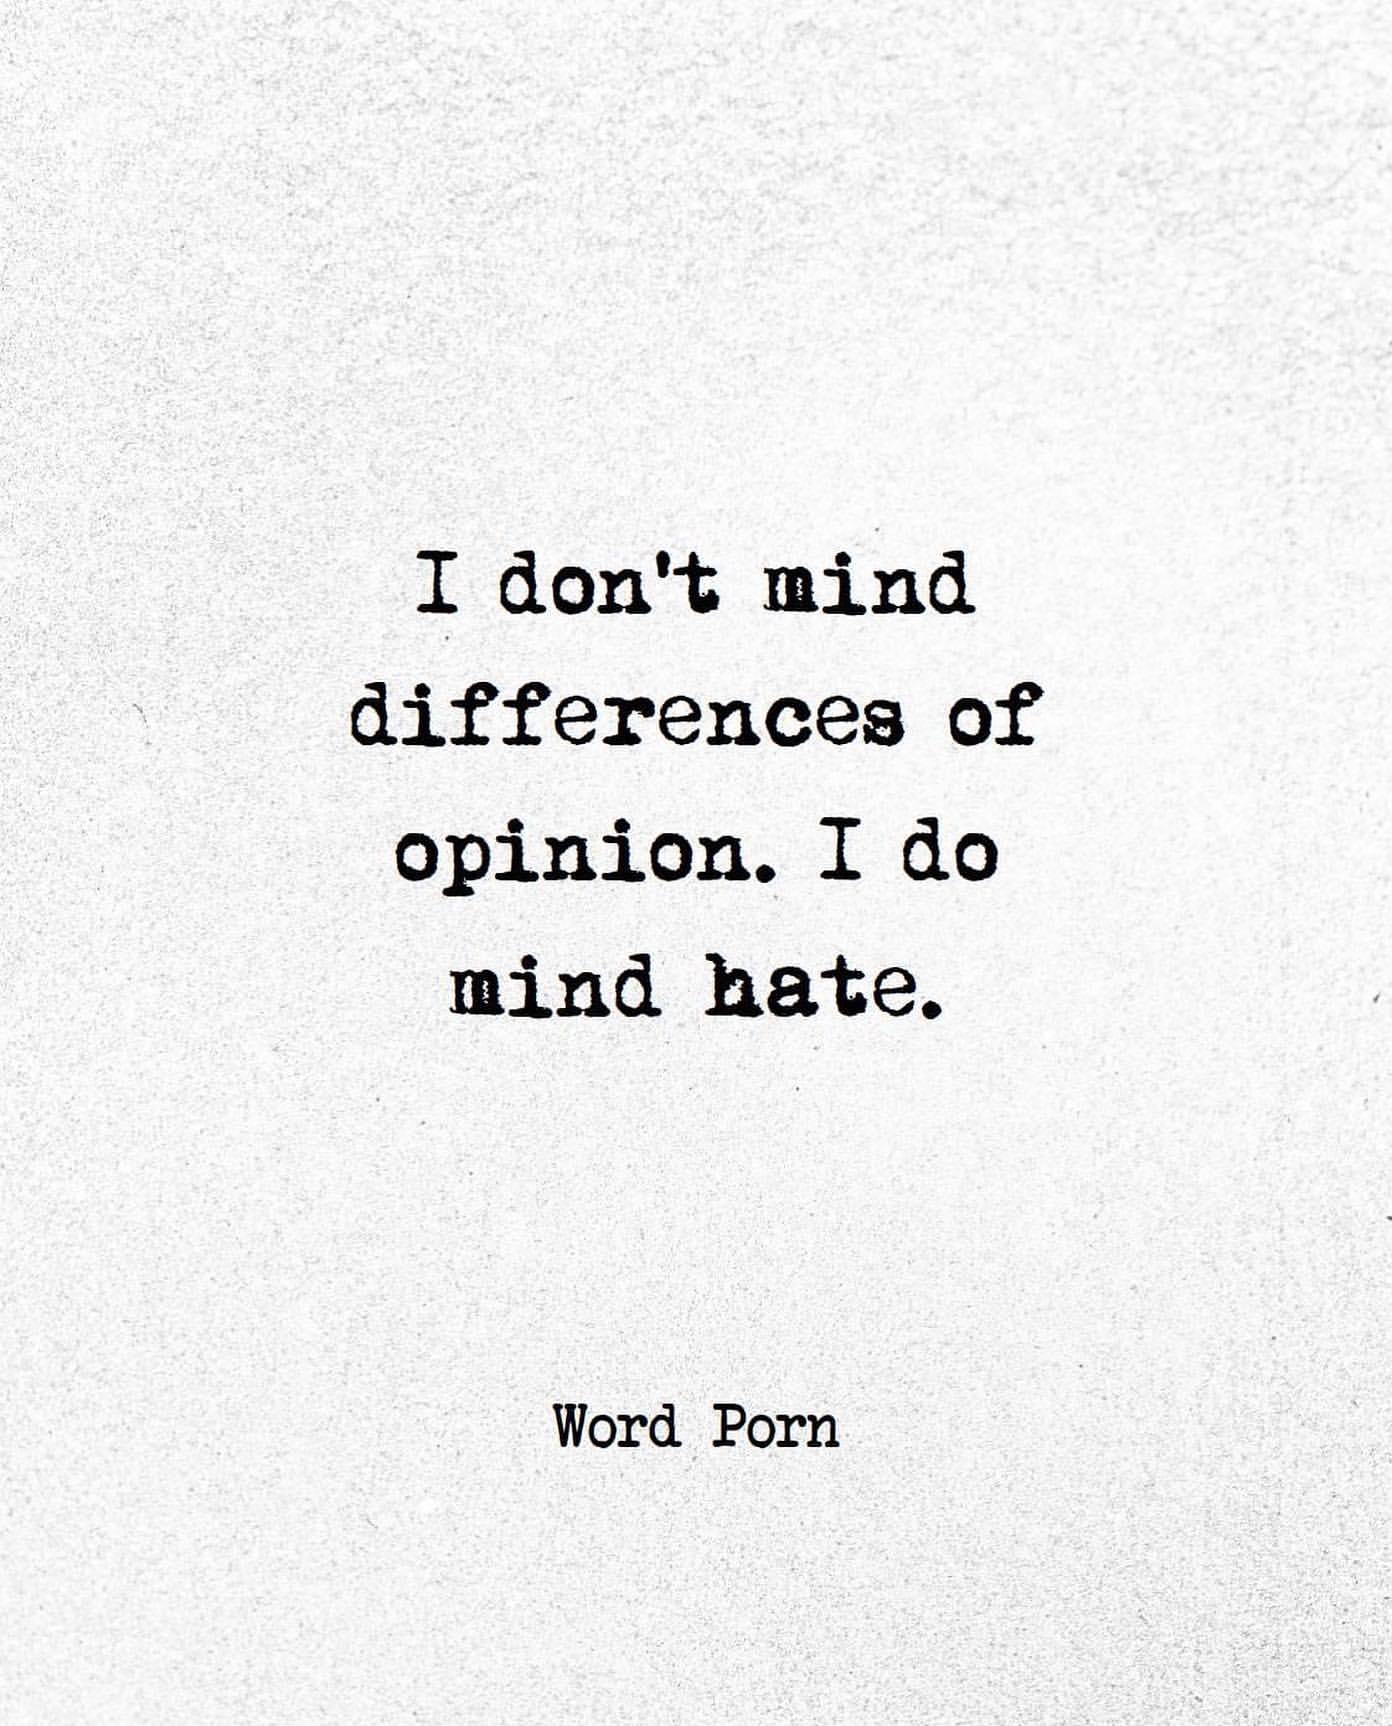 I don't mind differences of opinion. I do mind hate.